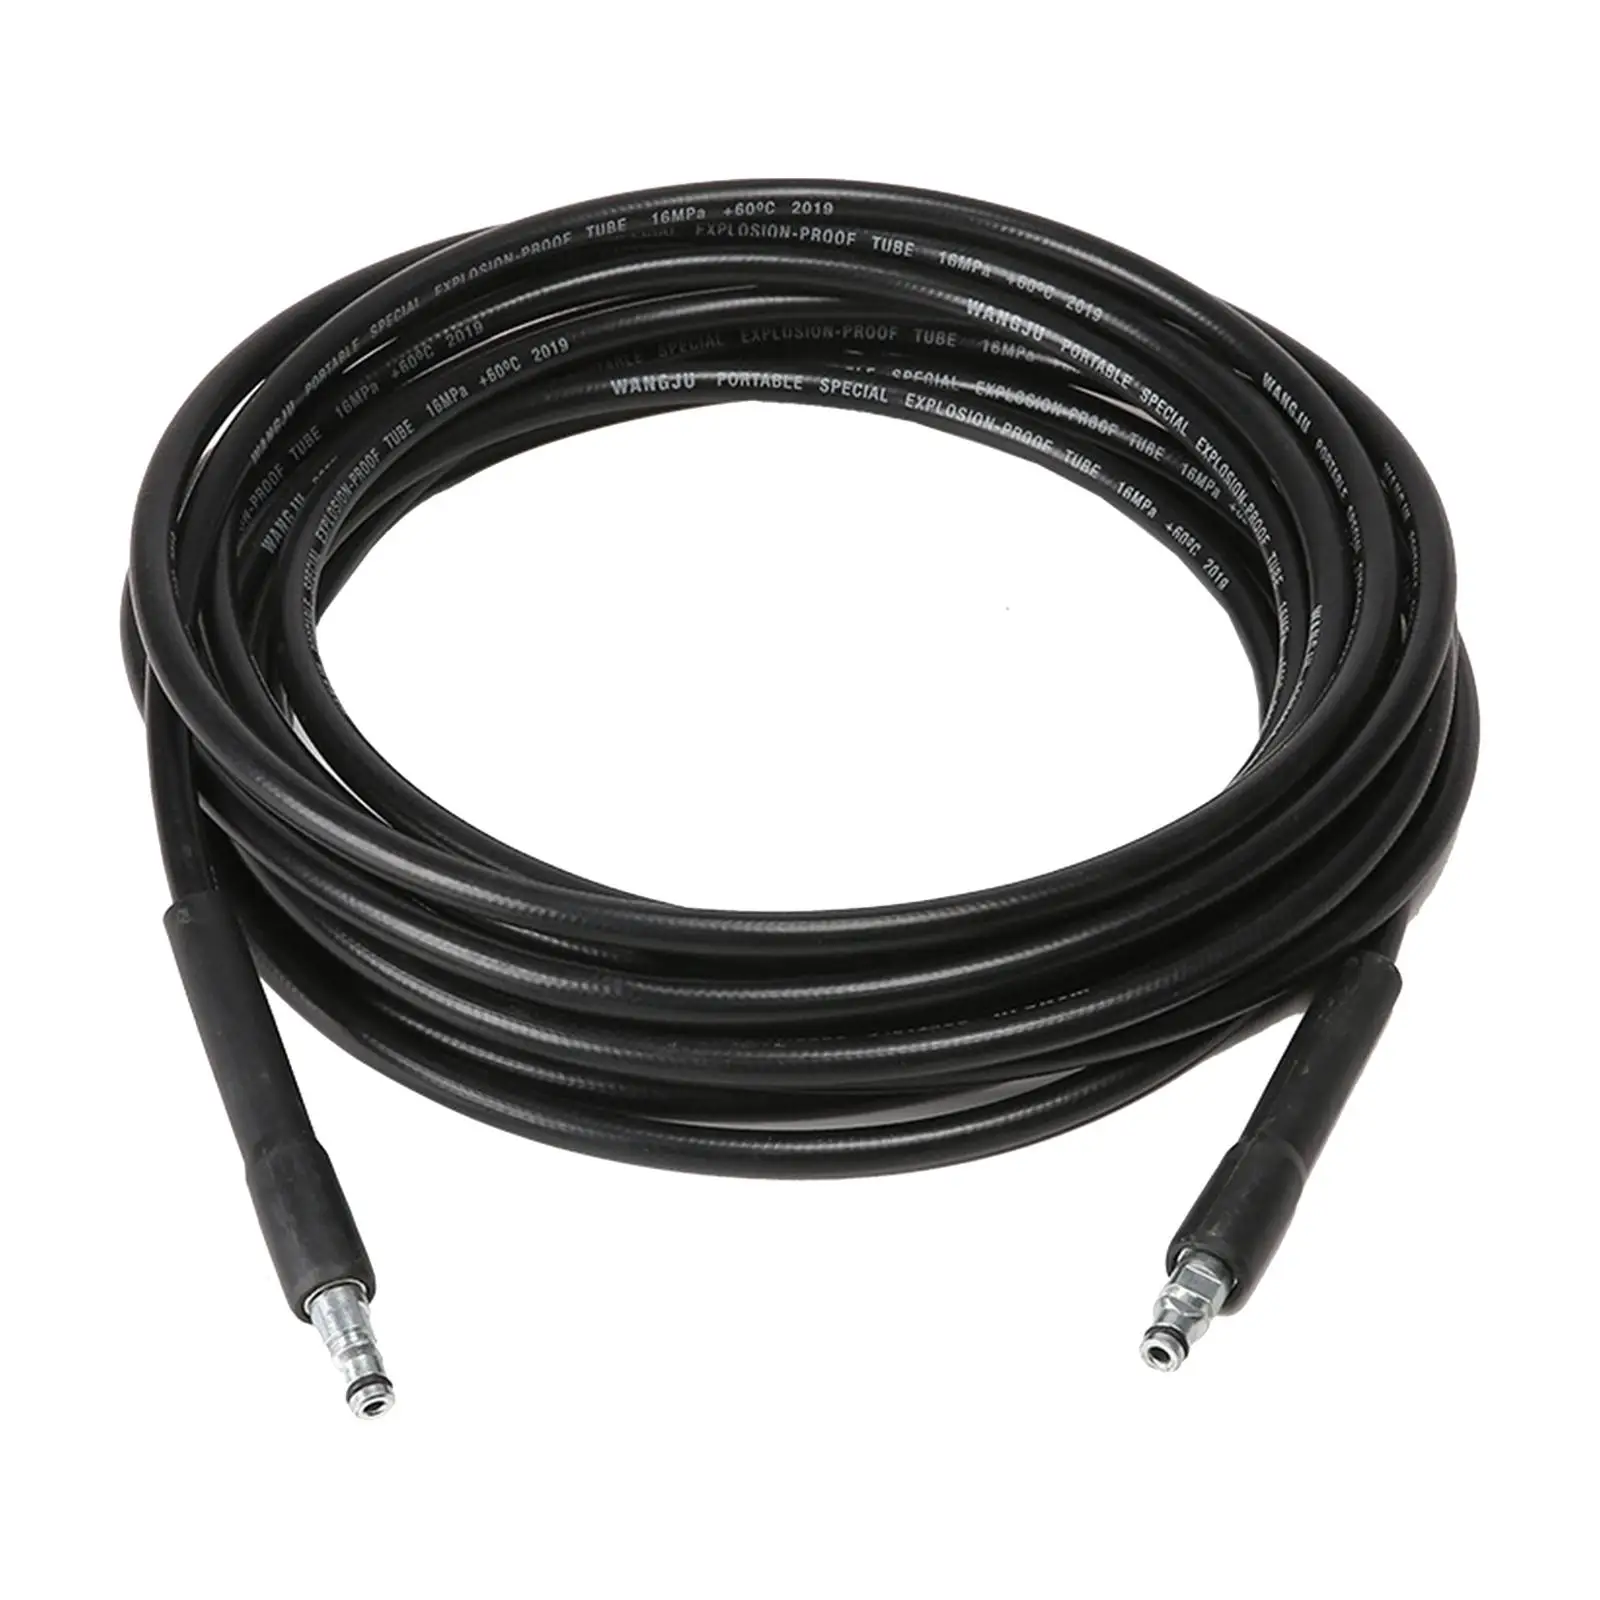 High Pressure Replacement Hose 49ft Rubber for Power Washer Accessories Replacement Parts Pressure Washing Extension Hose